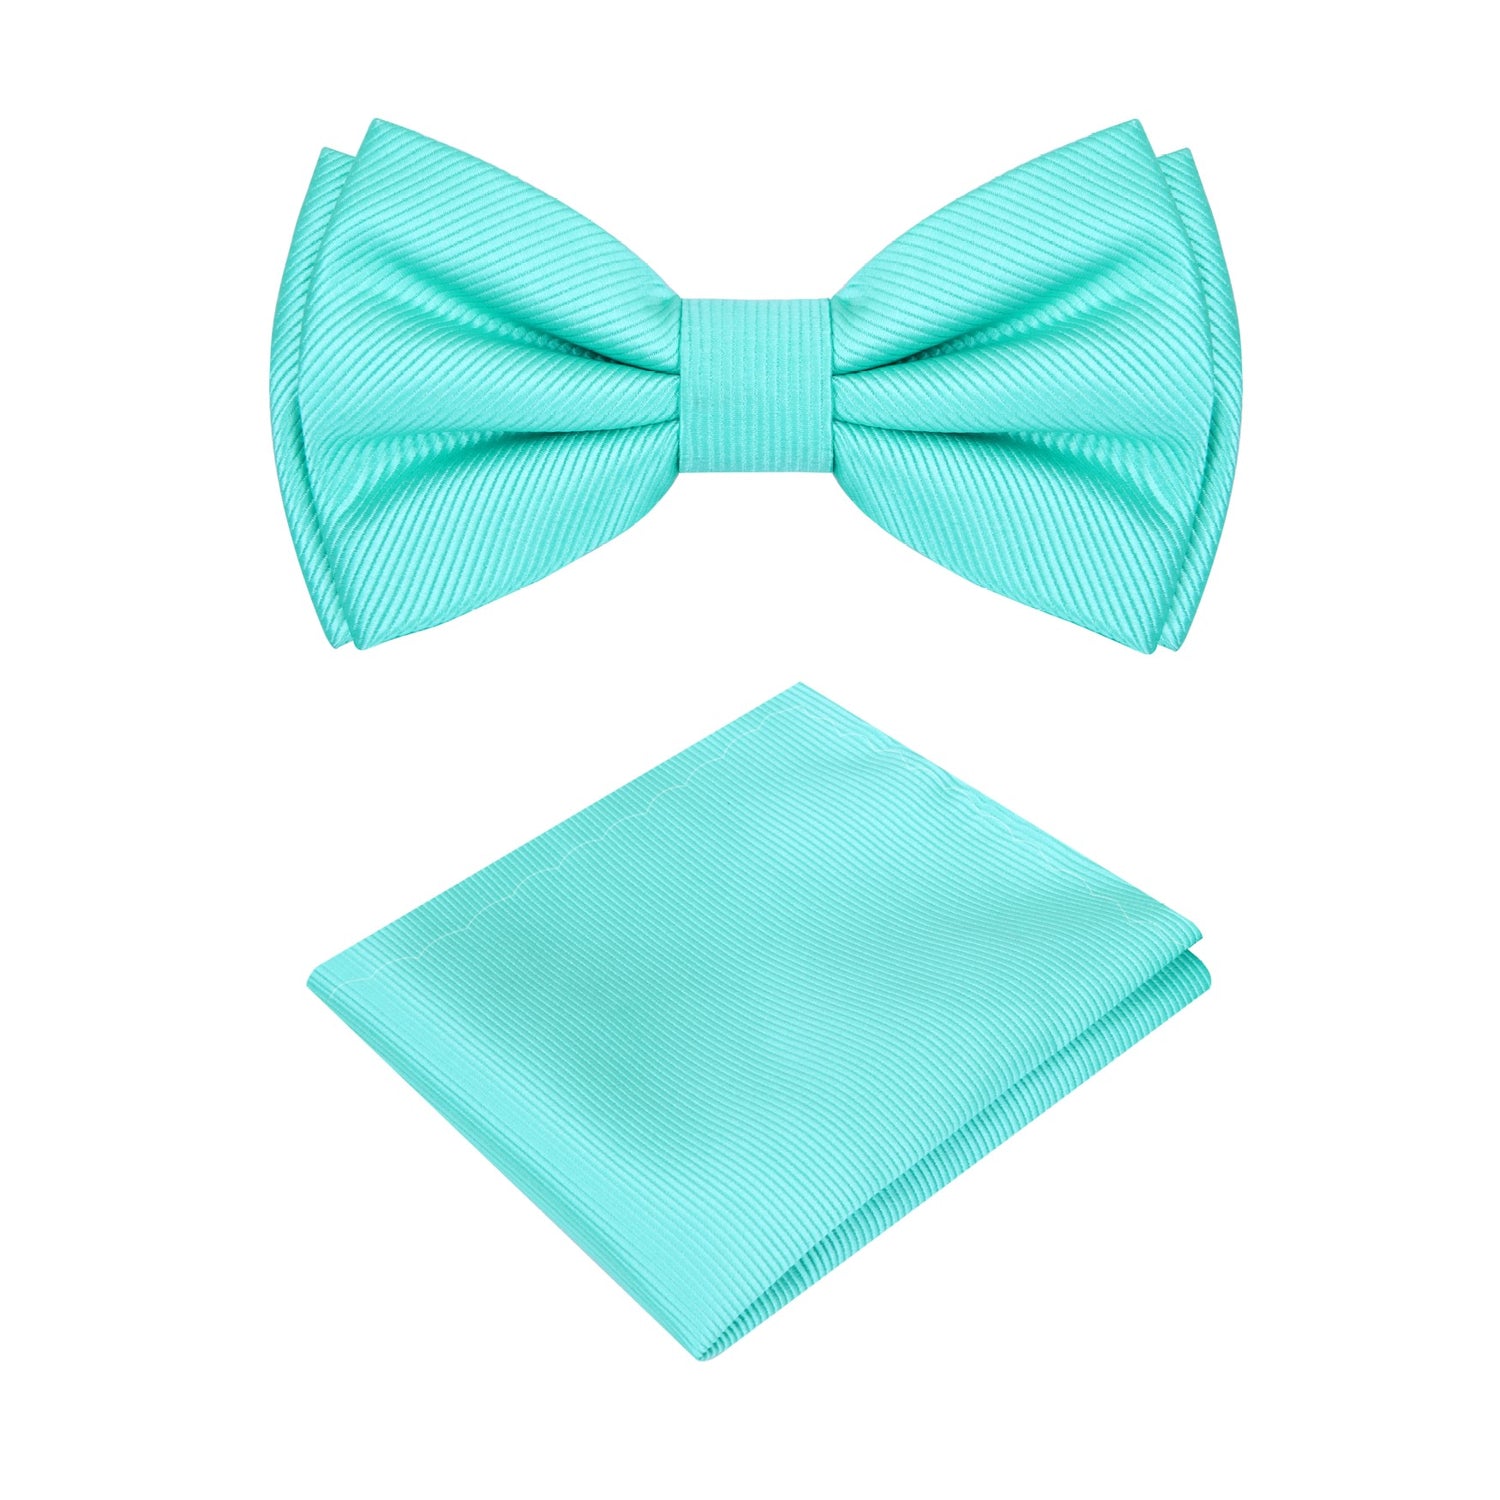 A Mint Solid Pattern Silk Self Tie Bow Tie, Matching Pocket Square